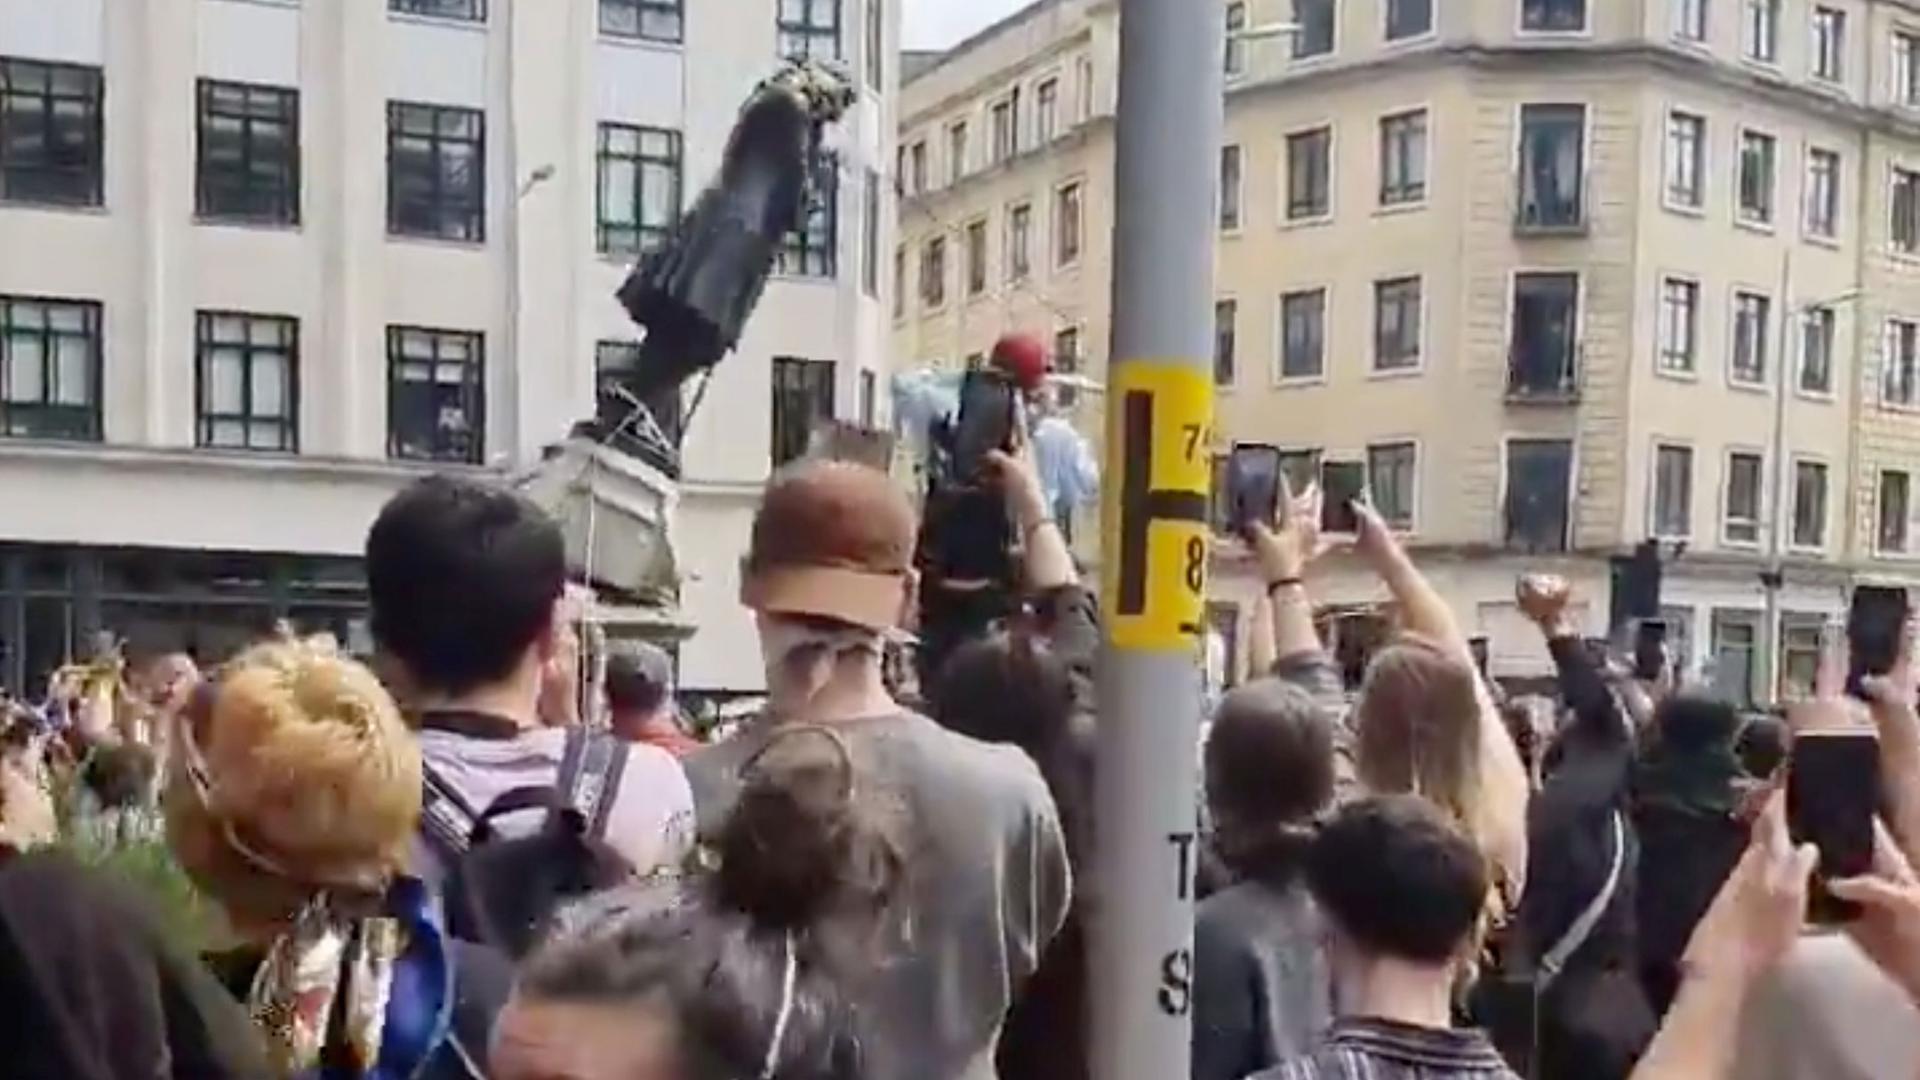 A large group of protesters are shown pulling down the metal statue of Edward Colston.